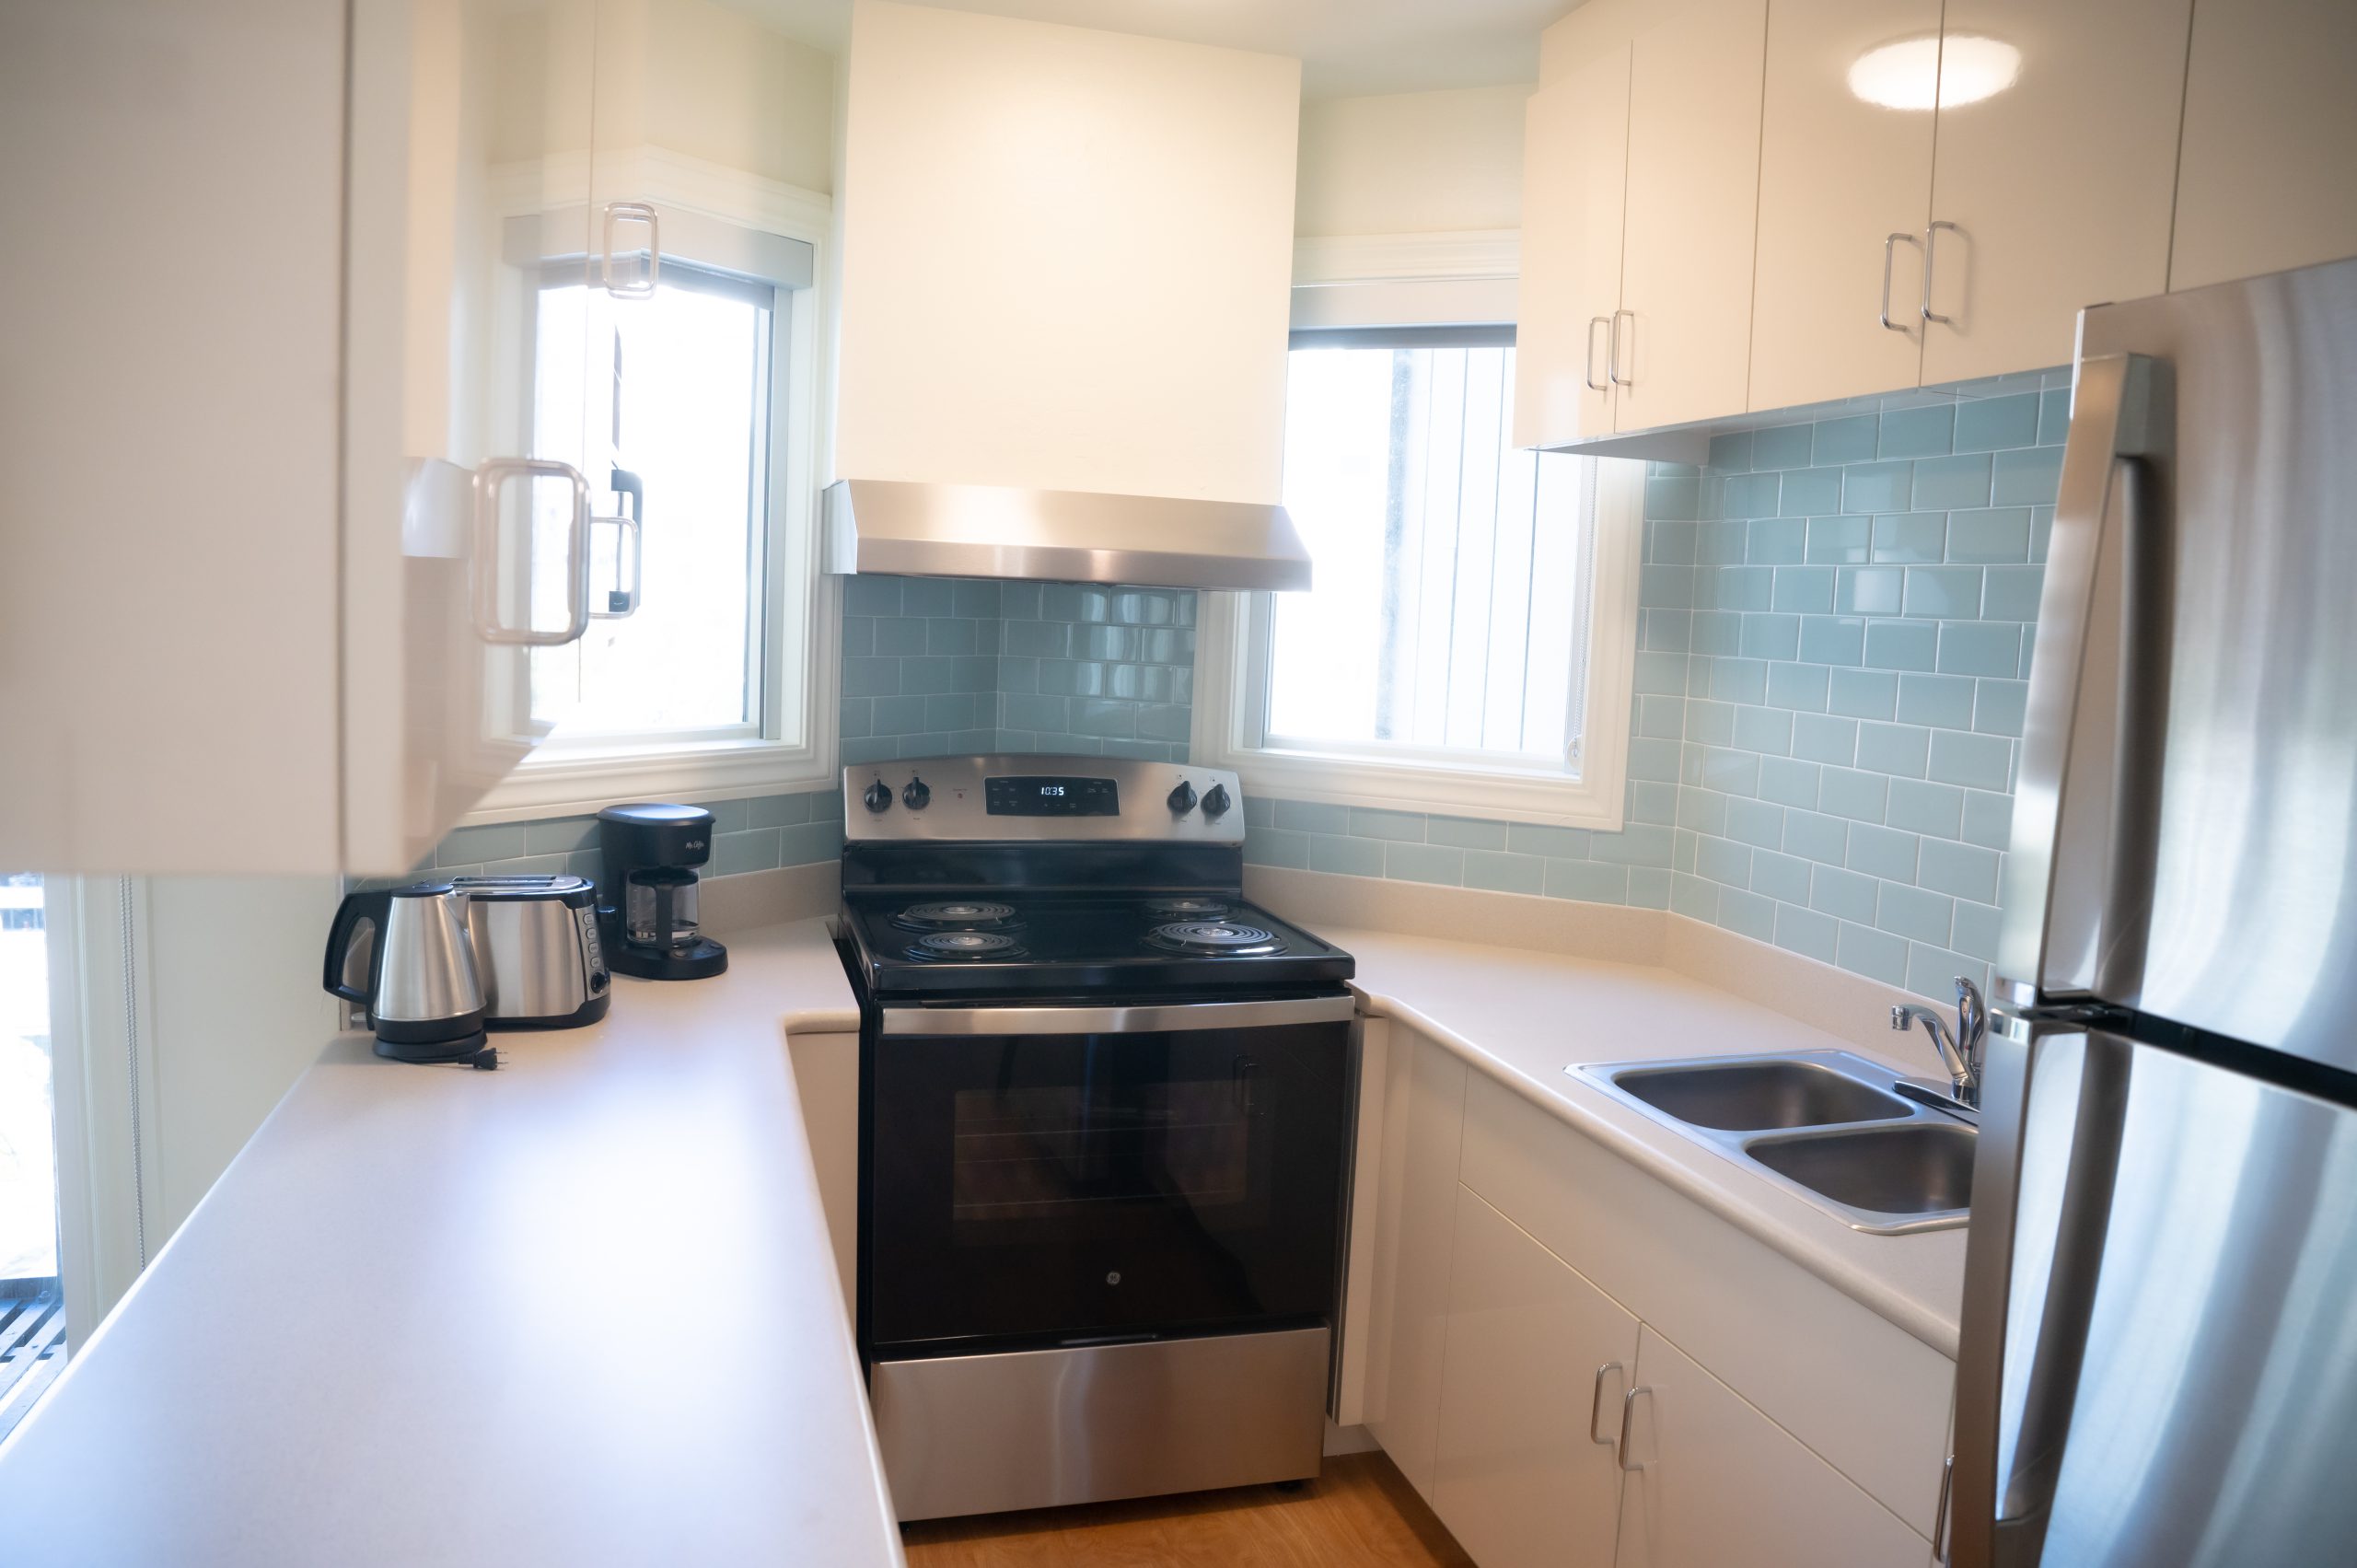 A brightly colored kitchen with blue tiles, lots of countertop space and a stovetop